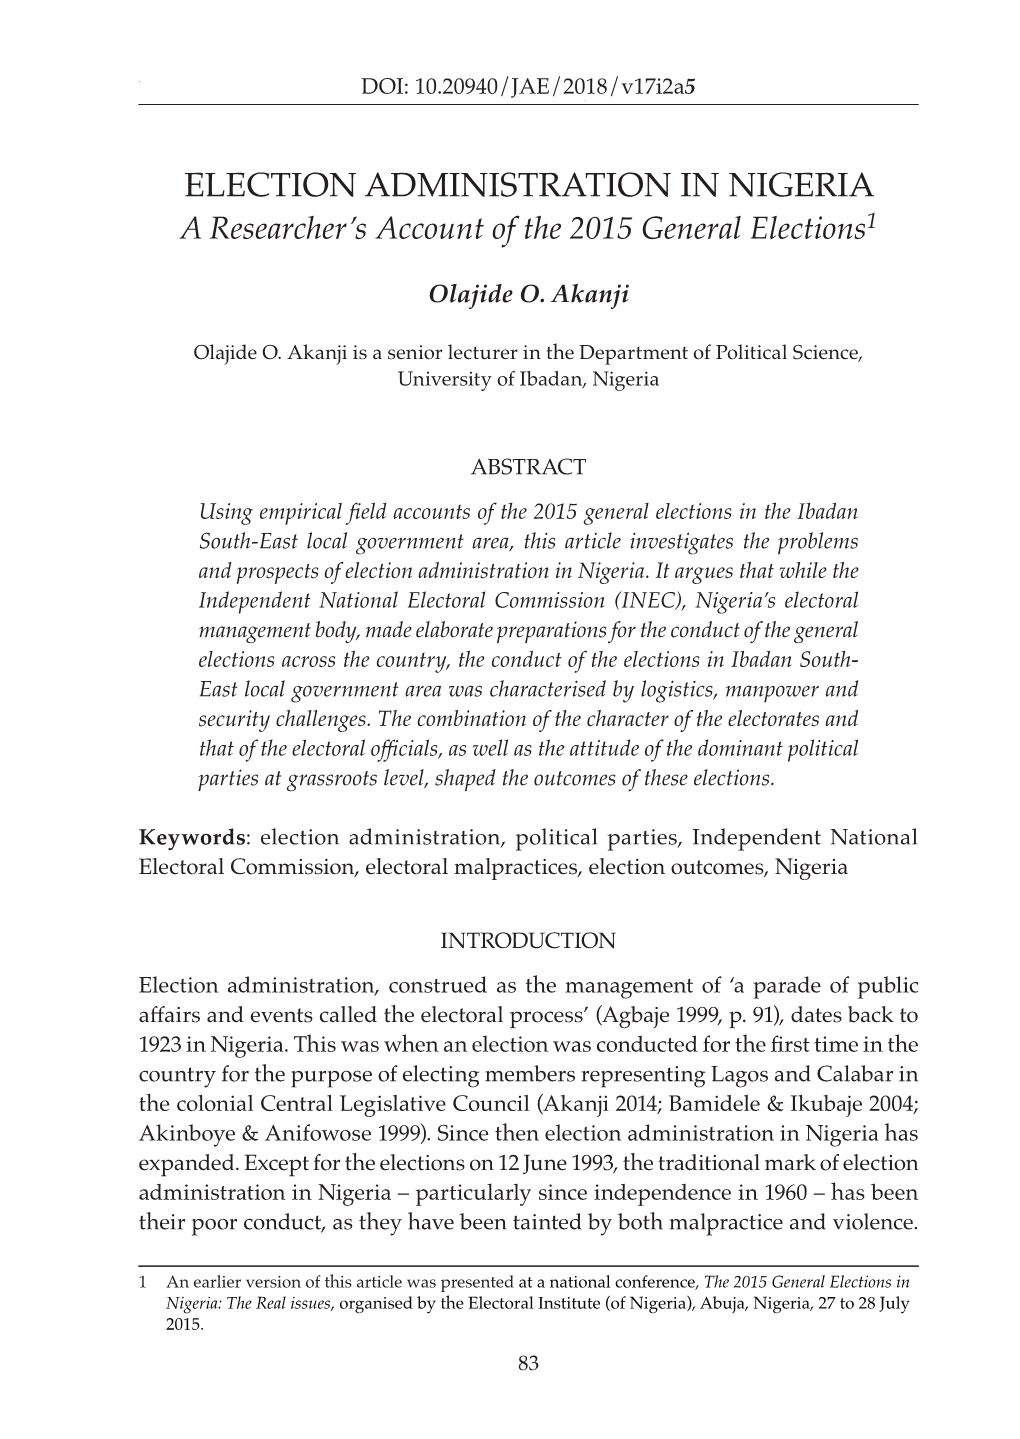 ELECTION ADMINISTRATION in NIGERIA a Researcher’S Account of the 2015 General Elections1